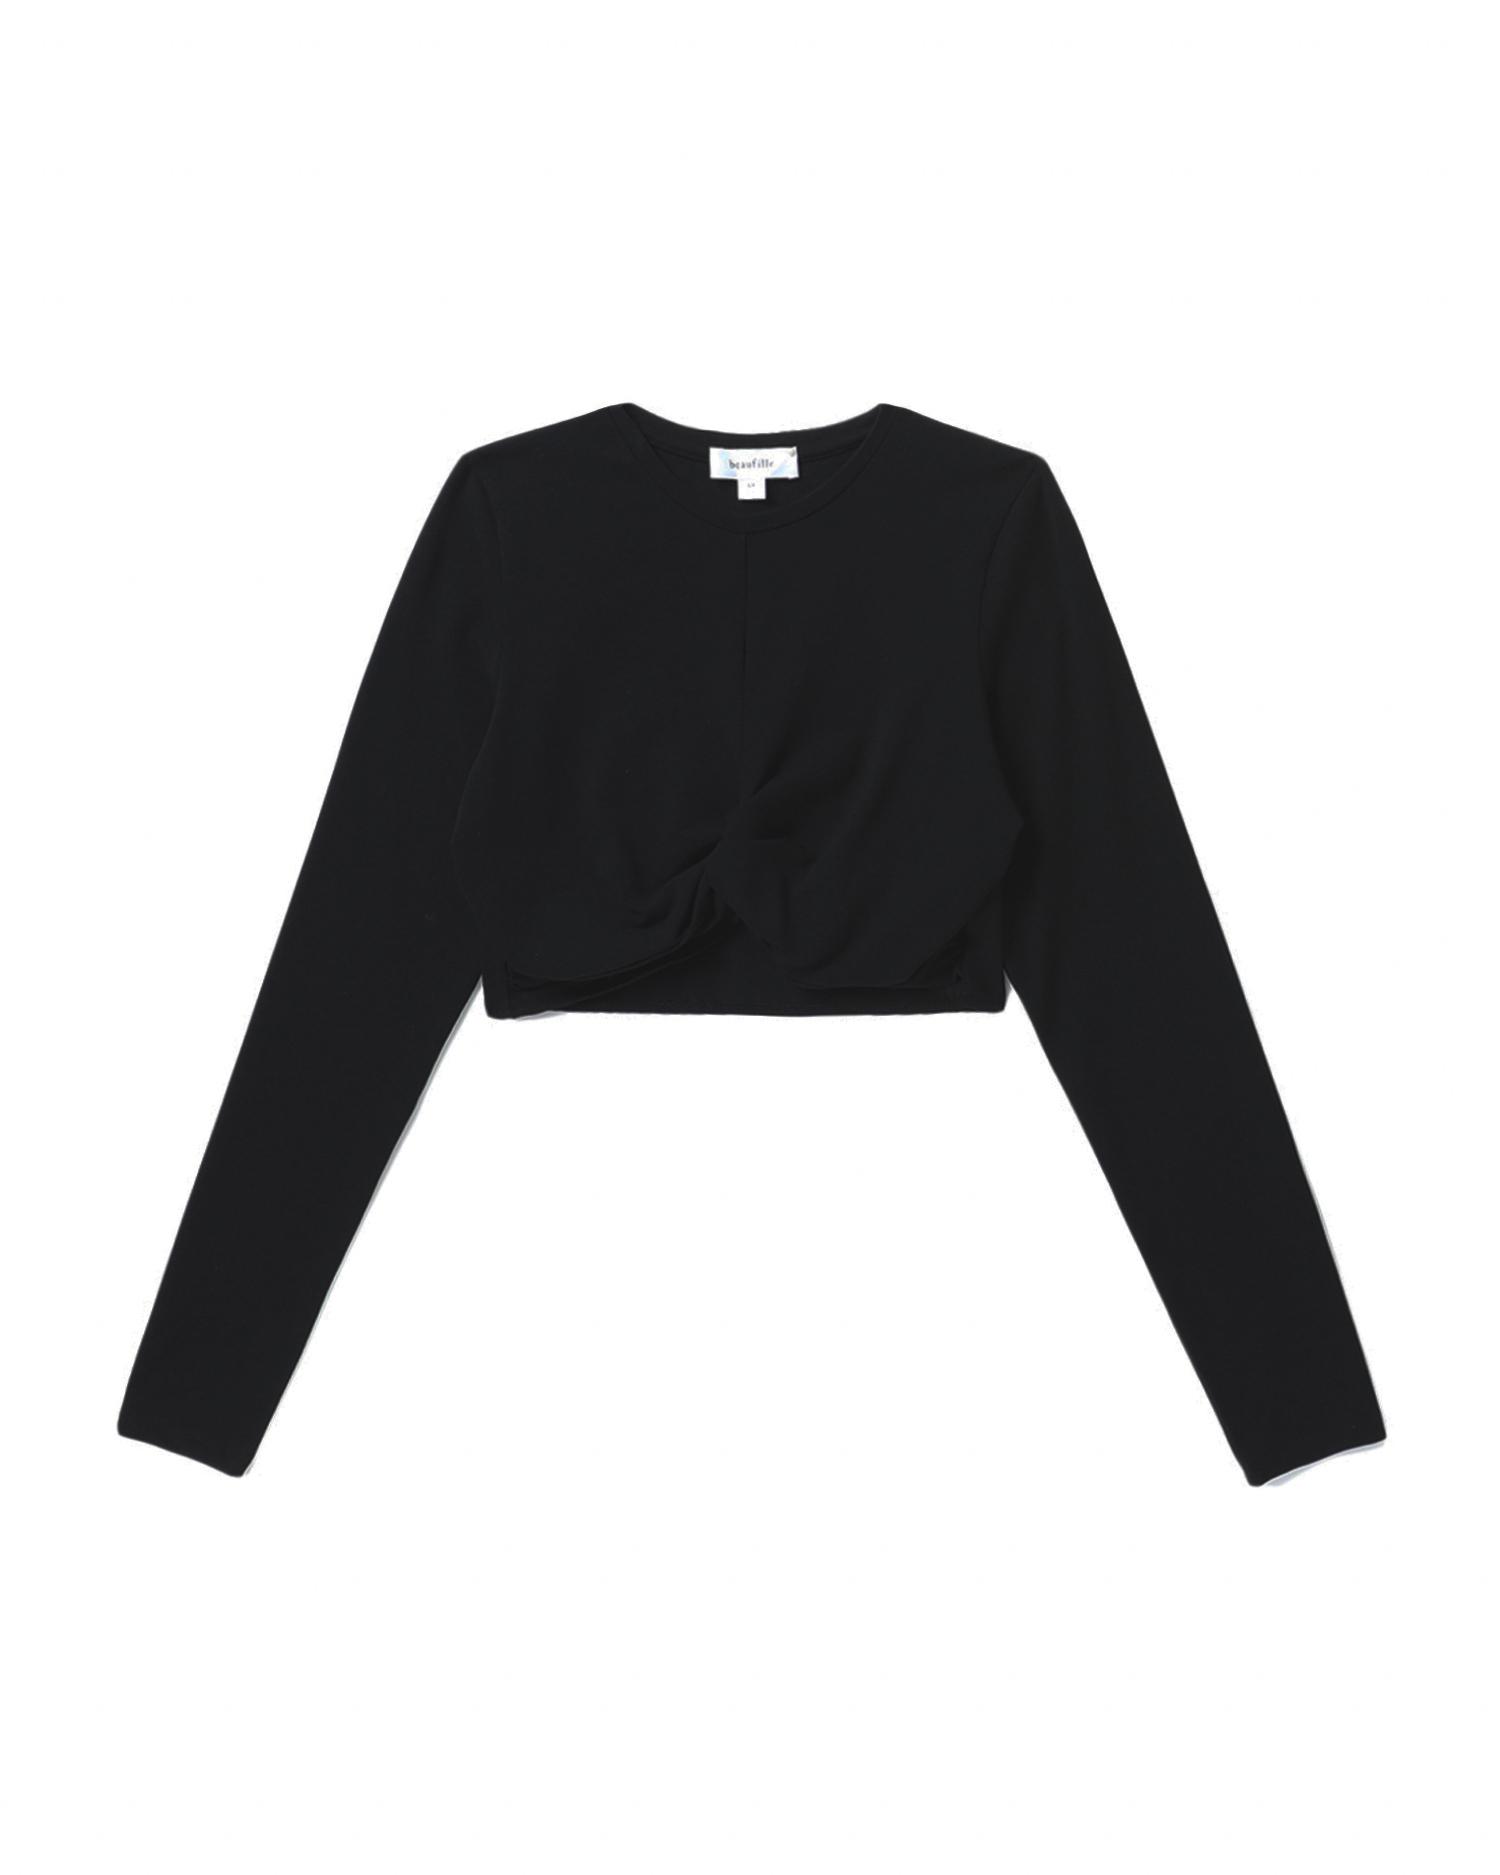 Taro long sleeve top by BEAUFILLE